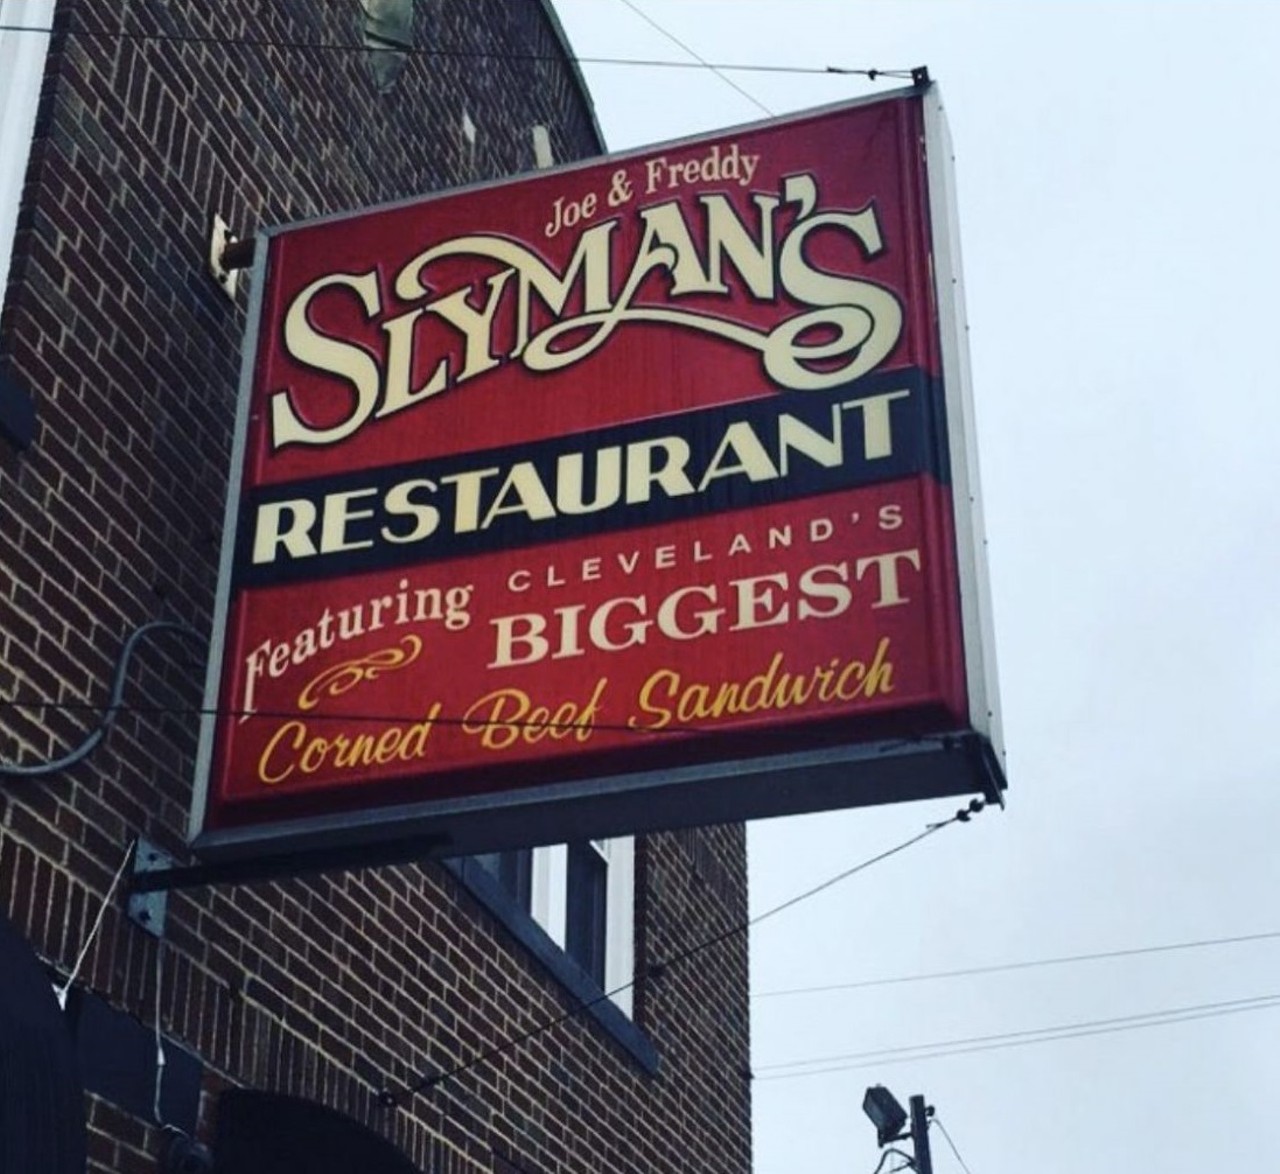  Corned Beef From Slyman&#146;s
3106 St. Clair Ave., Cleveland
16 tons and what do you get? The best corned beef sandwich without going into debt. They still slice every sandwich to order, and every sandwich still towers above much of the competition. 
Photo via @P.M.Anthony/Instagram